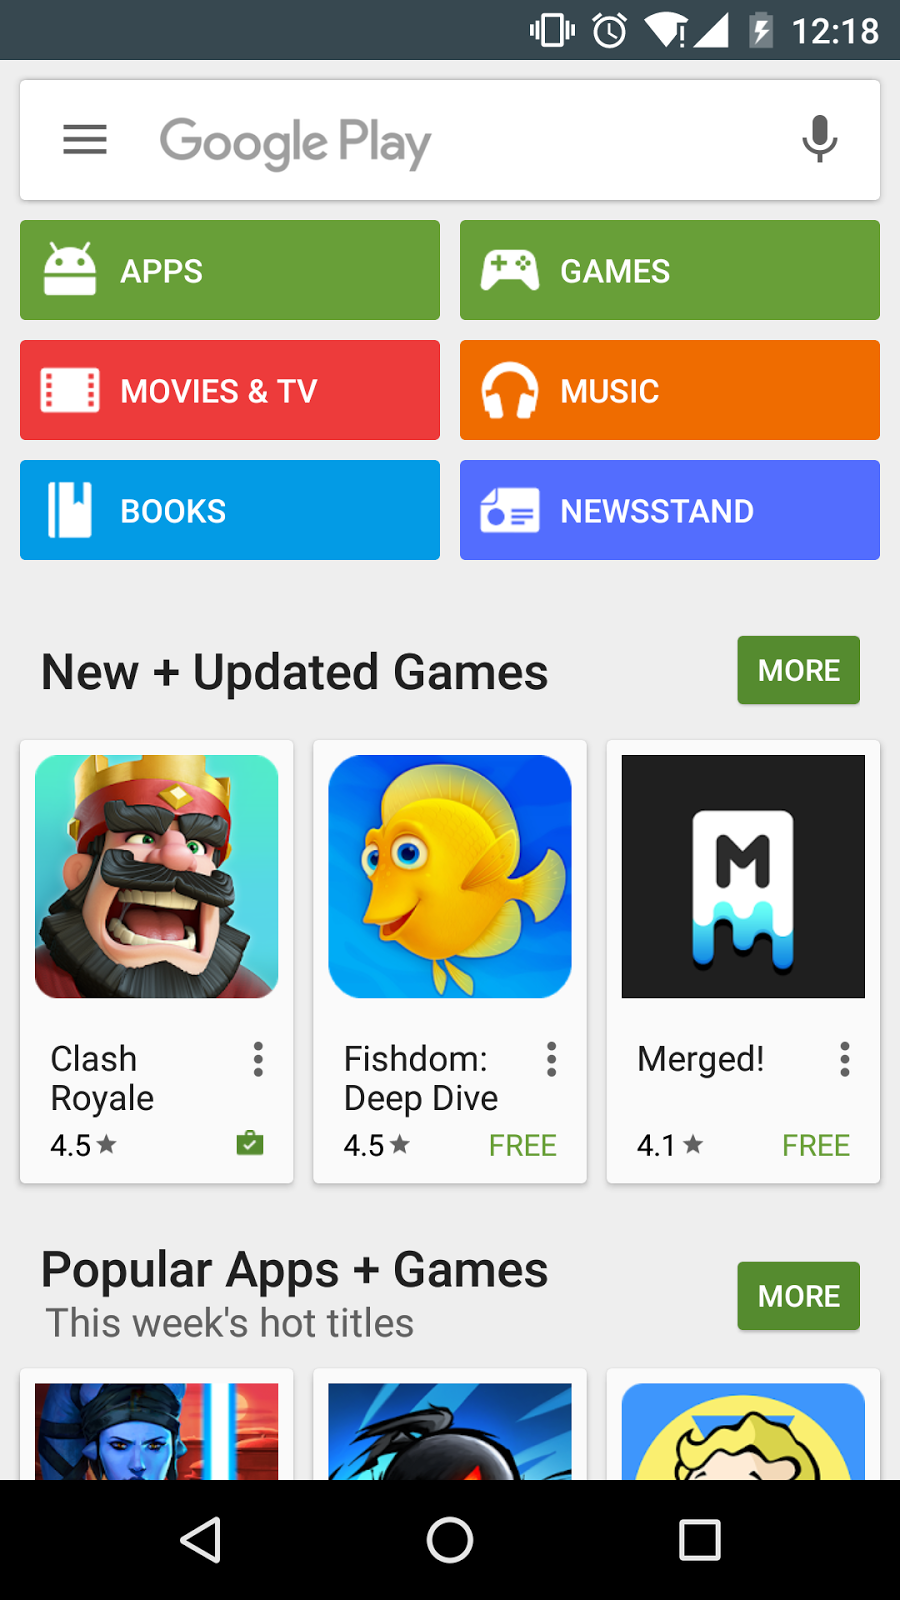 How to install Google Play Store App on your Android Phone